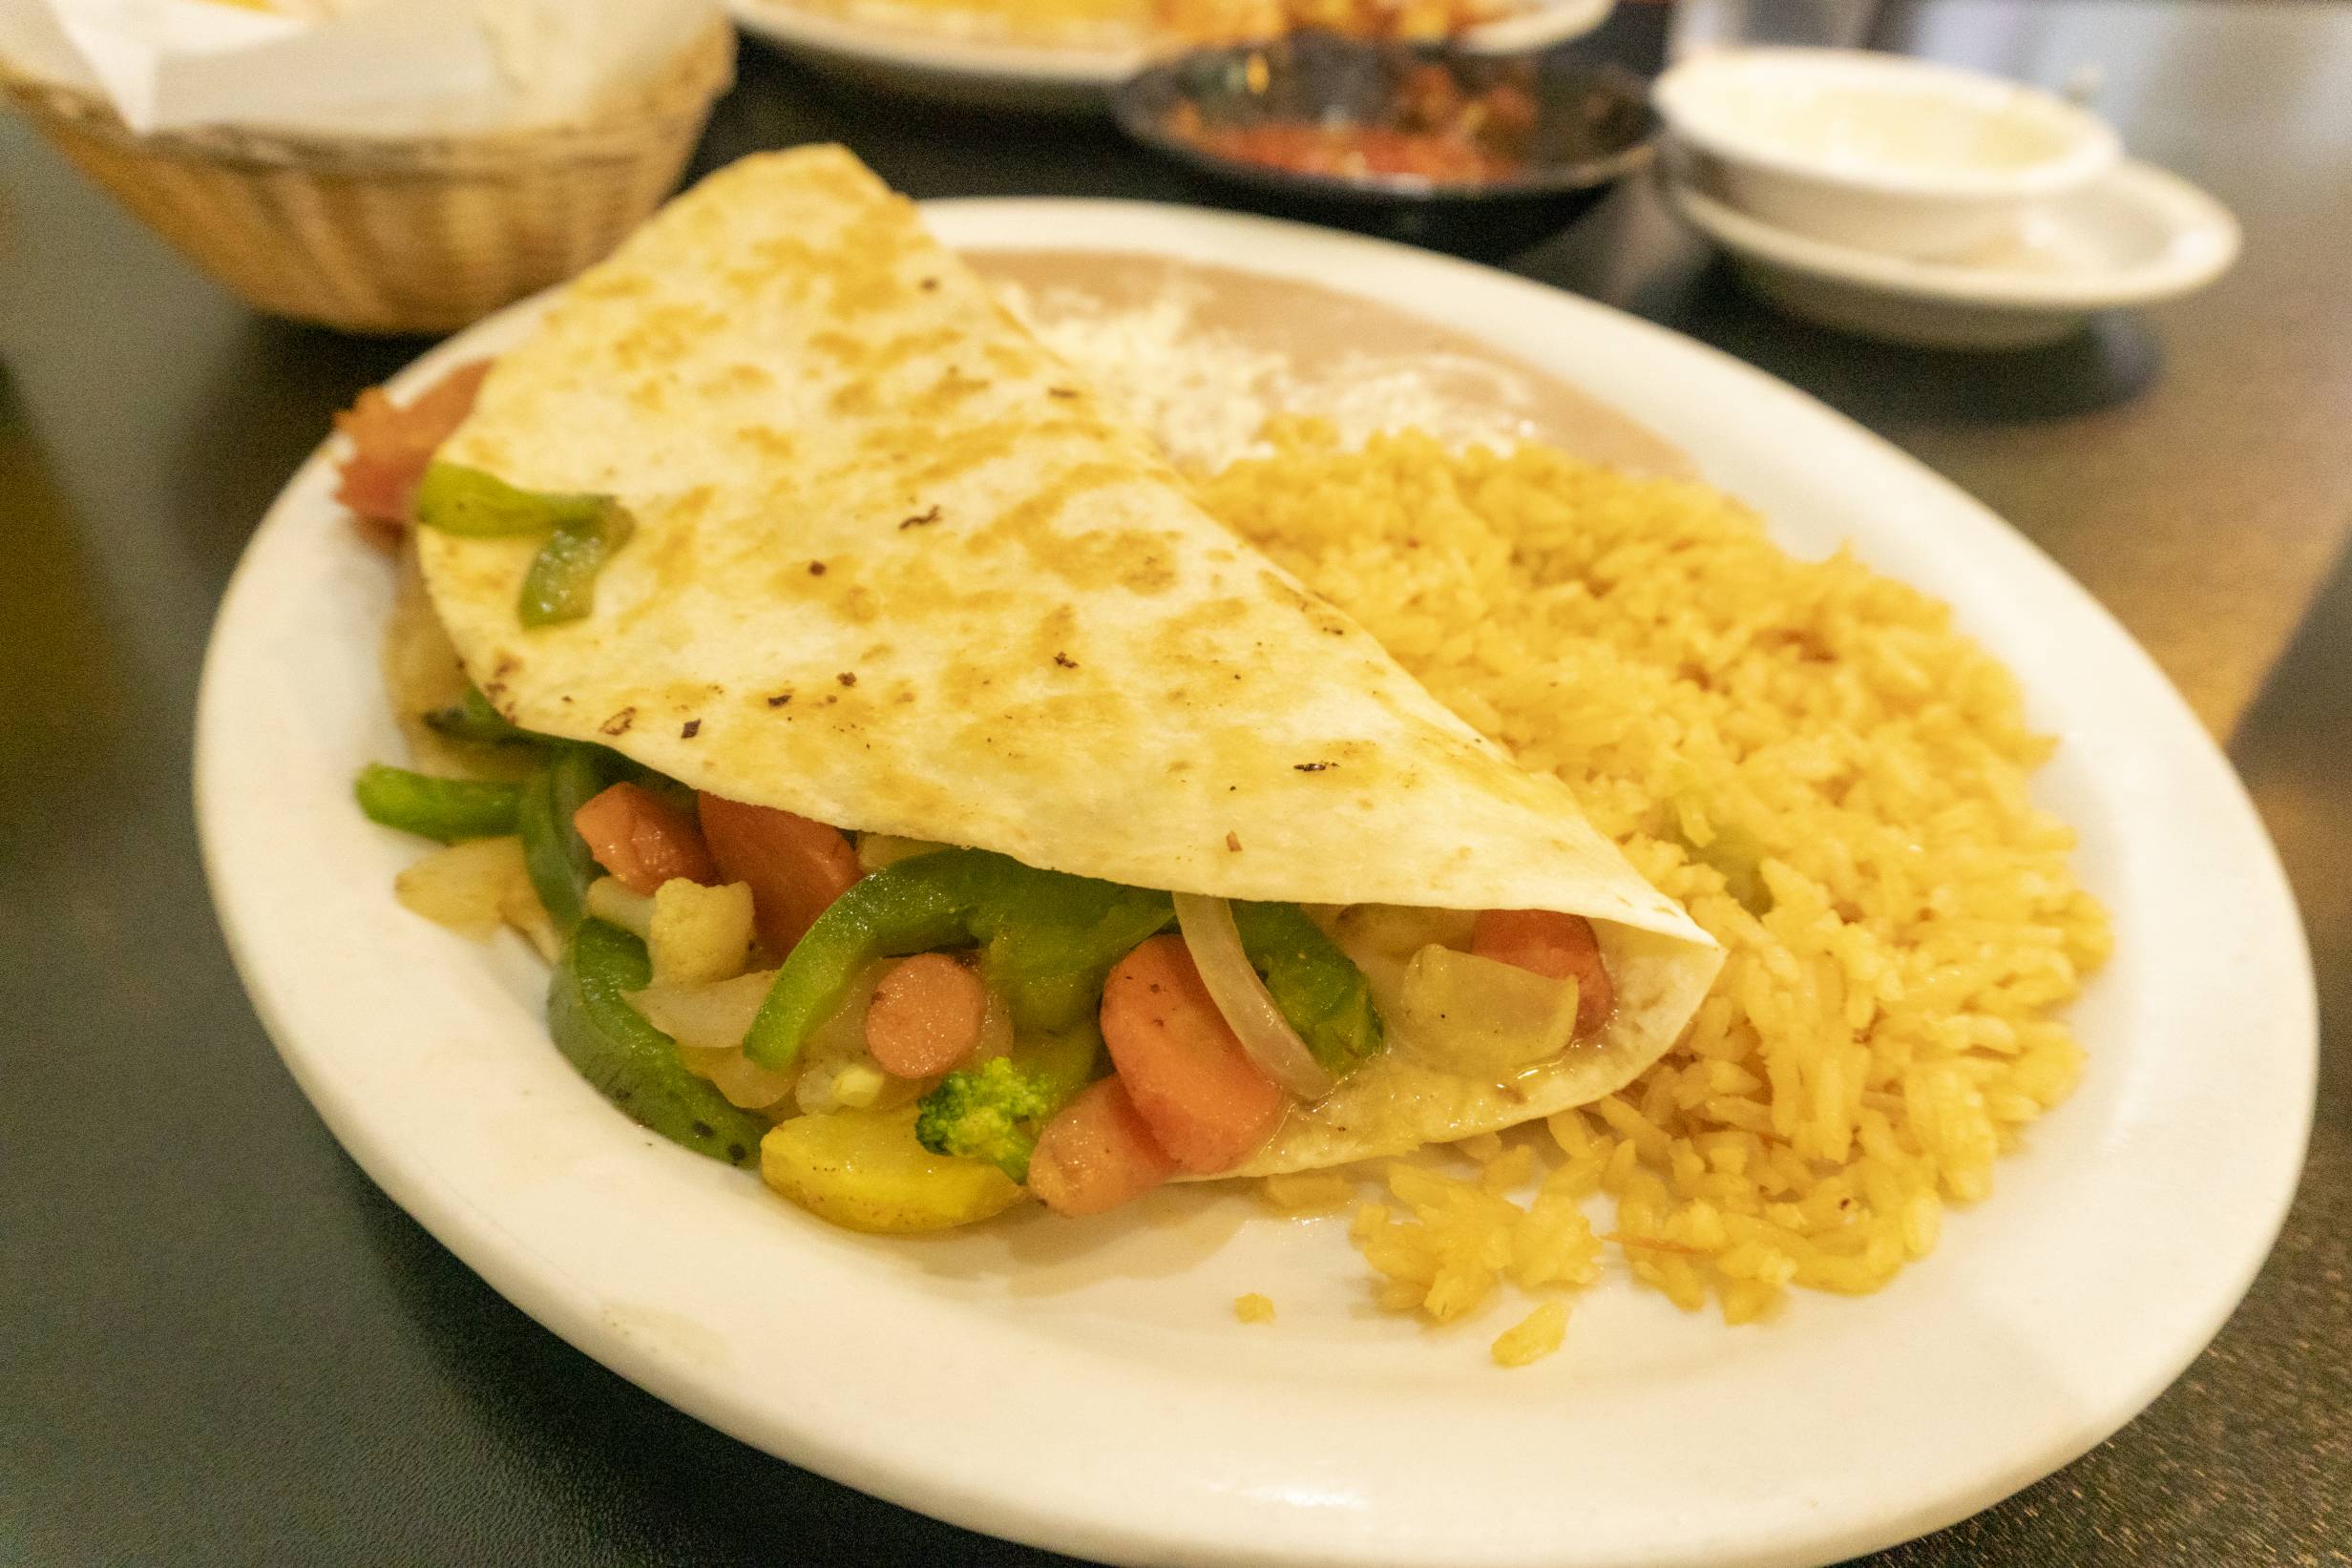 Veggie fajita quesadilla from El Patio. A crispy flour tortilla wrapped around a bed of vegatables including peppers, onions, squash, and carrots resting on refried beans and rice. Served on a white plate. Photo by Adam Rahn. 